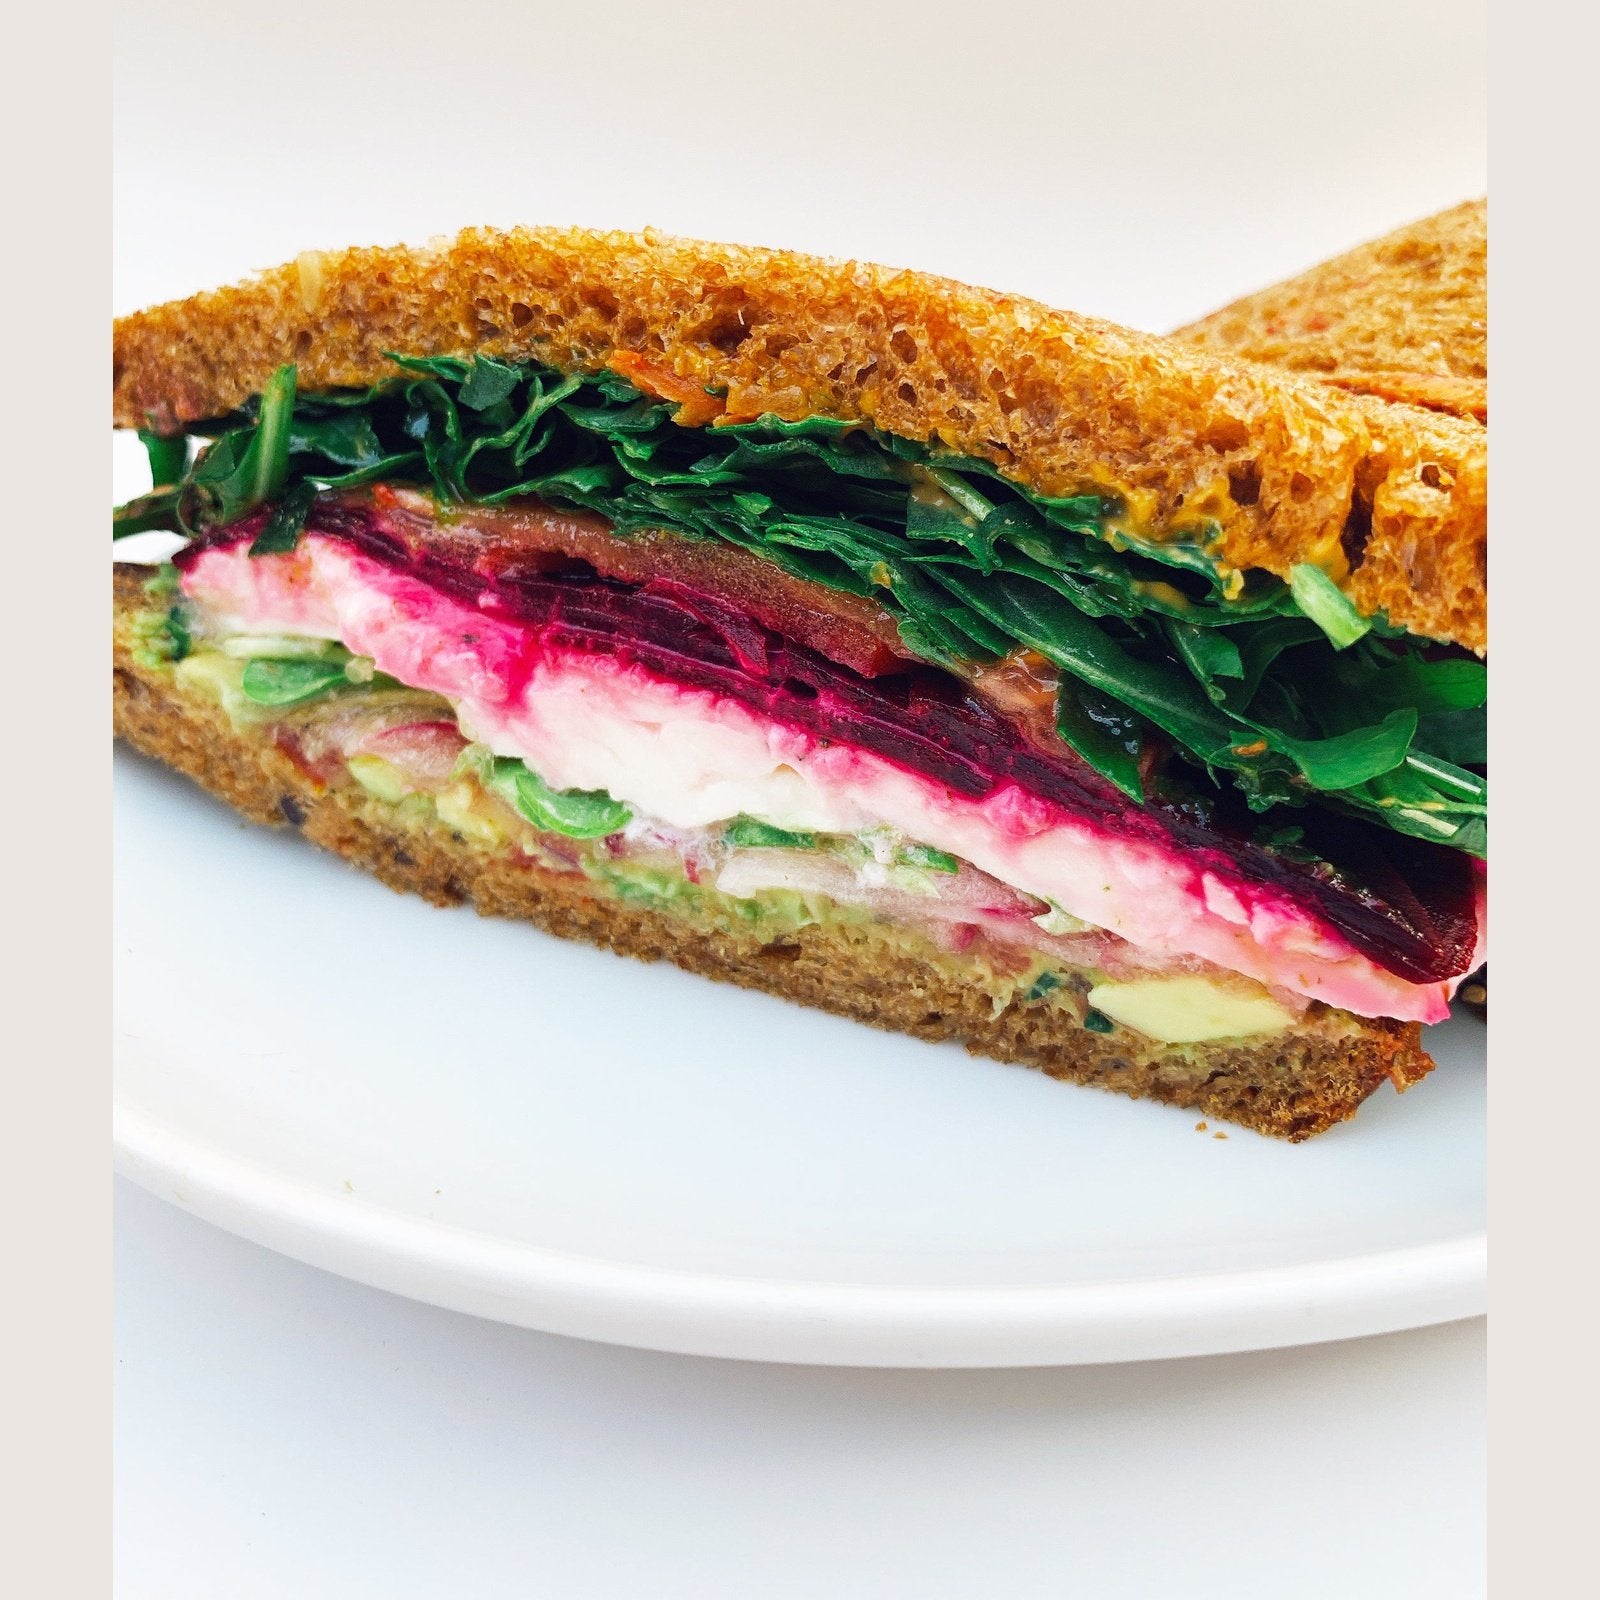 Image of A sandwich made with beets and tomatoes